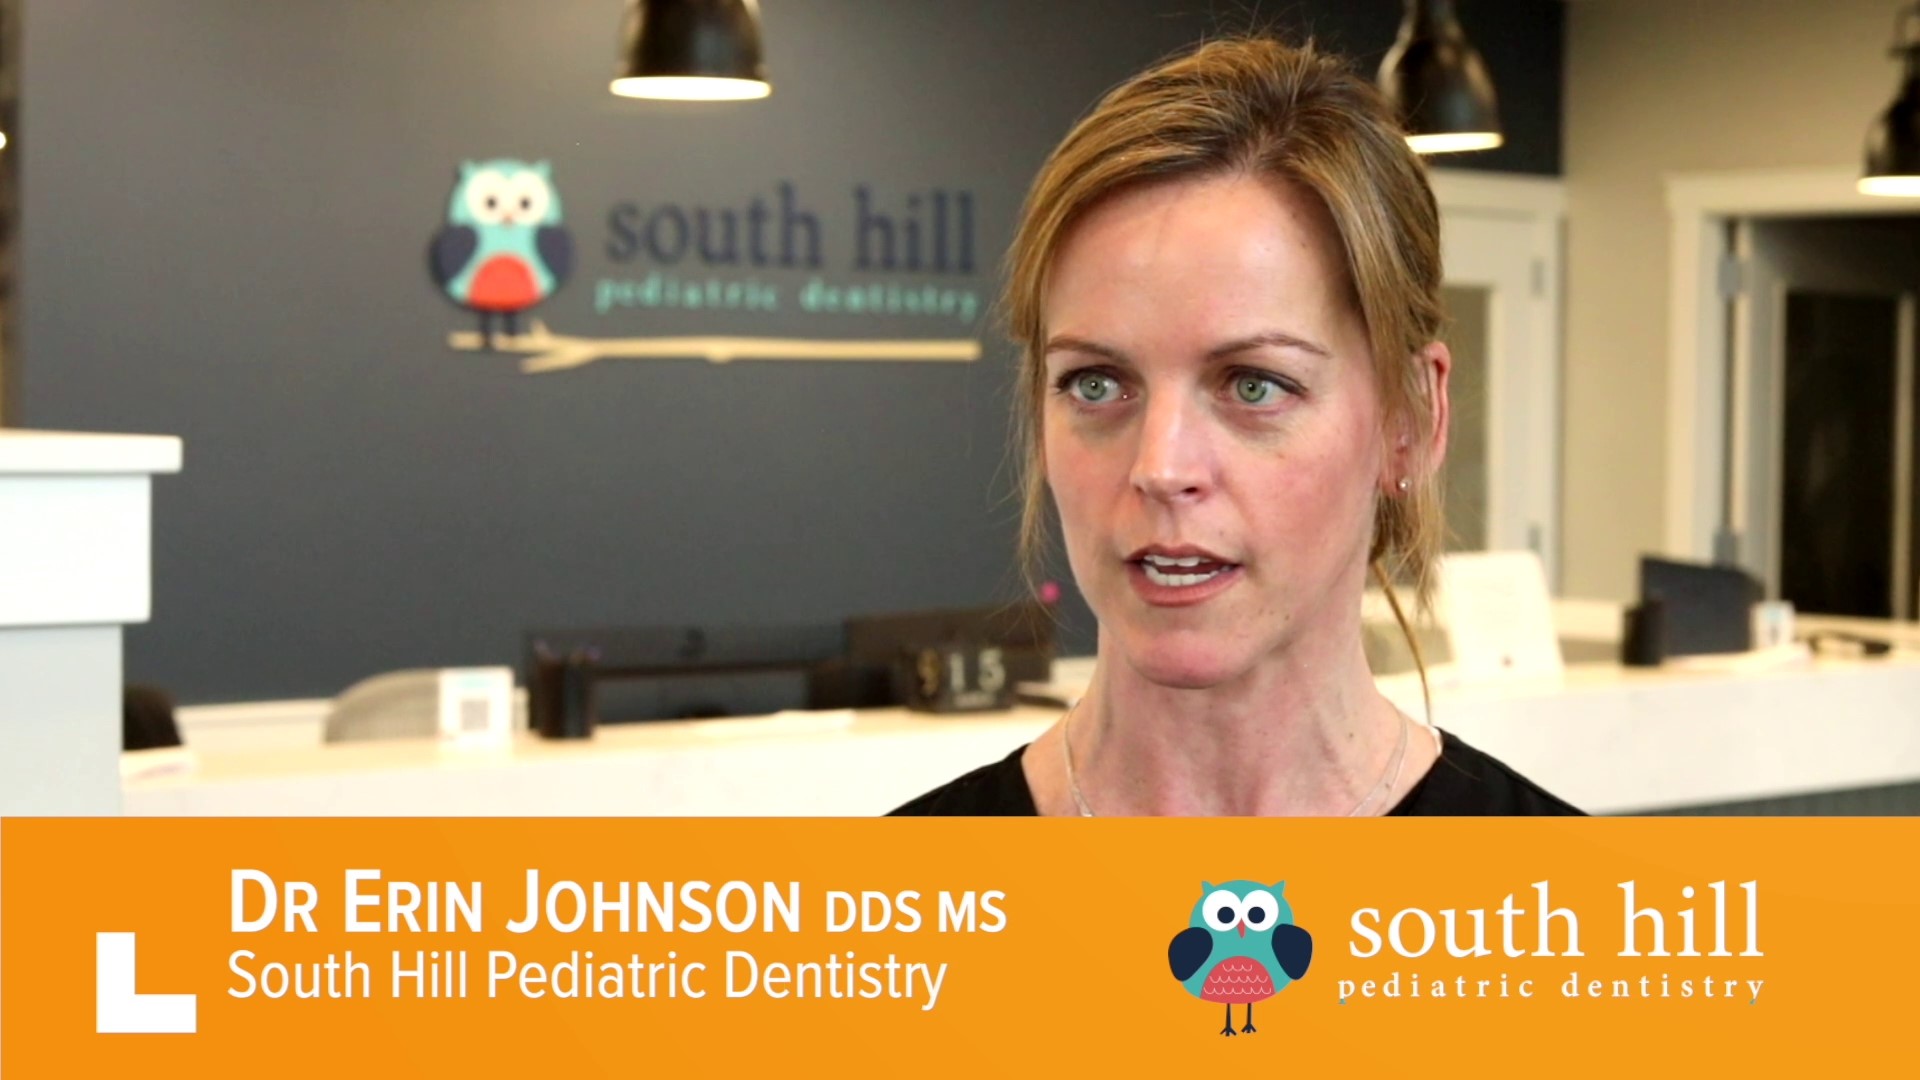 Their mission is to provide the greater Spokane area with comprehensive, accessible, coordinated oral healthcare in a nurturing, child-centered dental office.